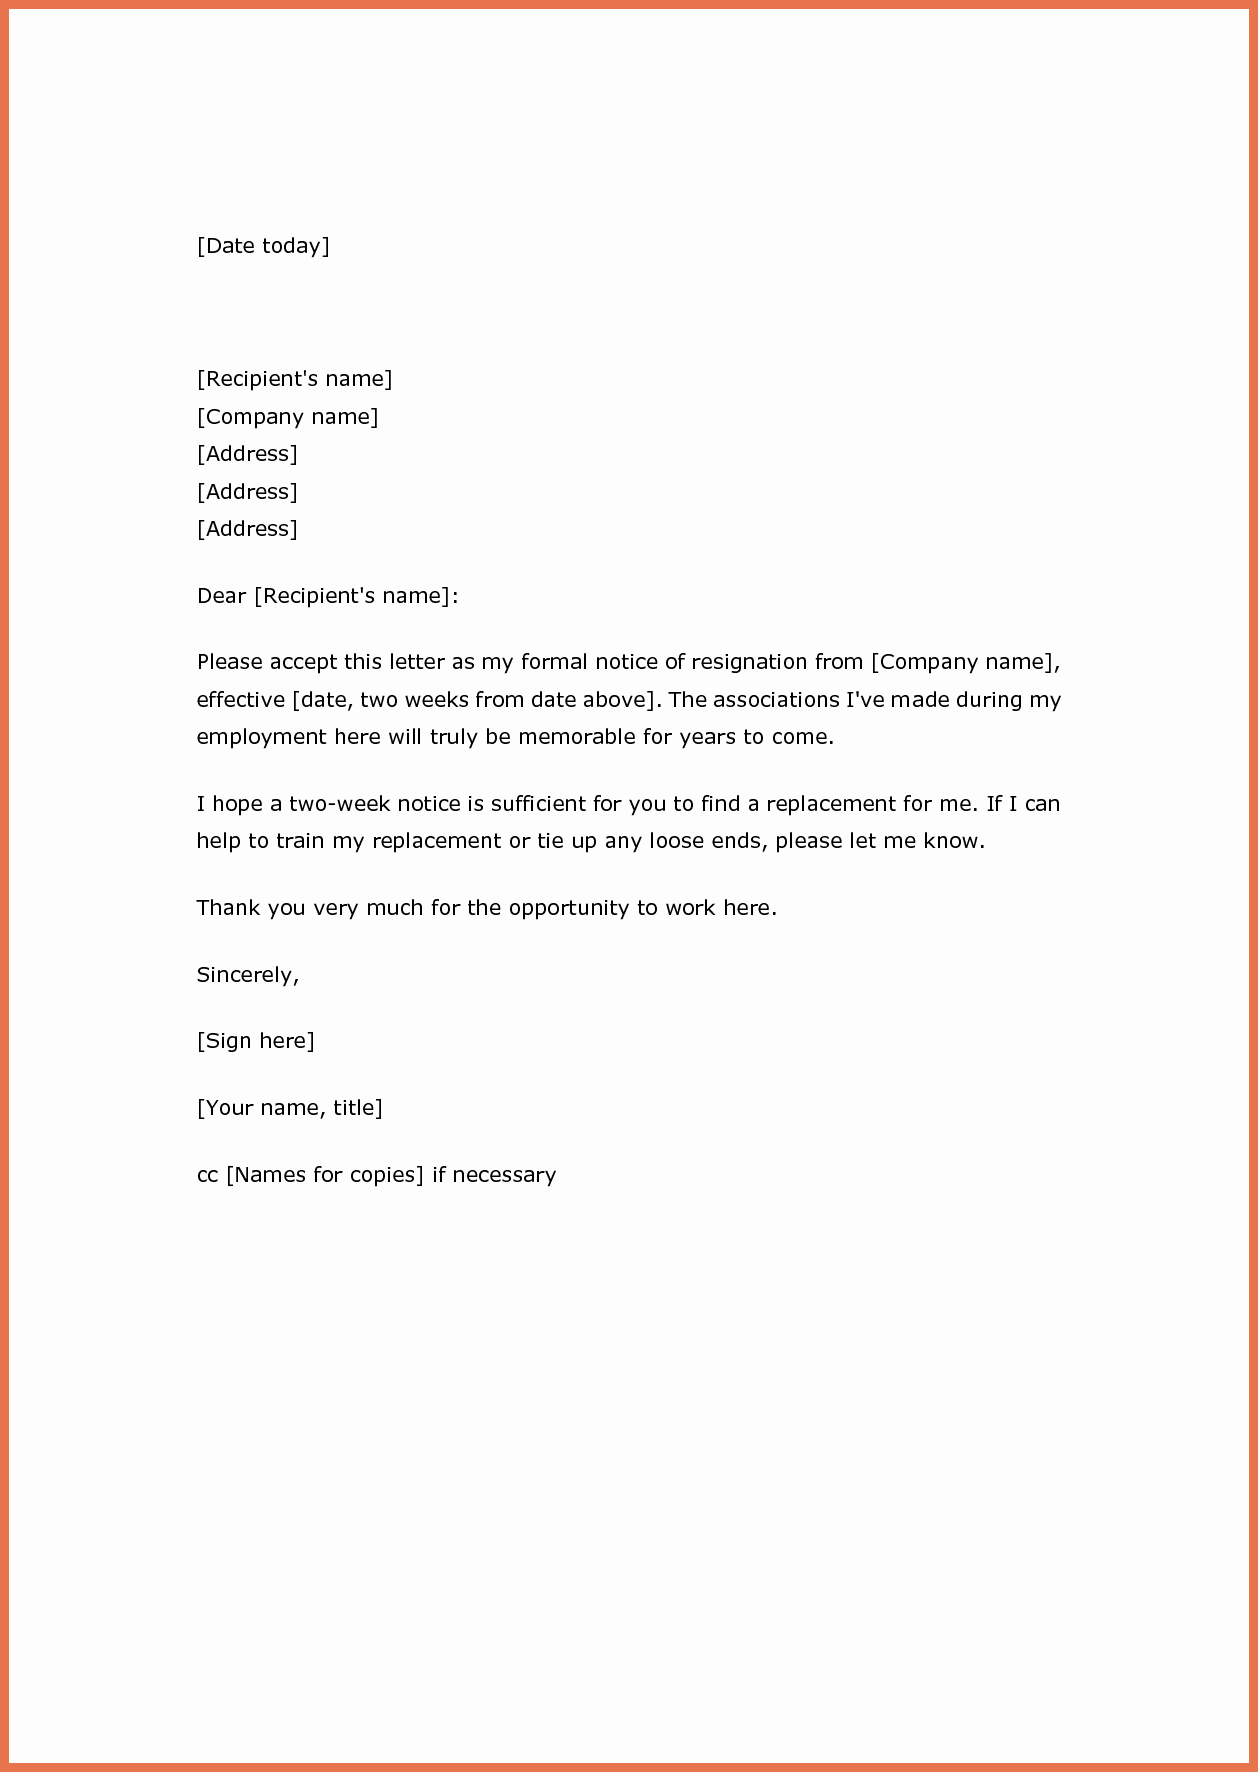 Two Week Resignation Letter Awesome Two Weeks’ Notice Resignation Letter Samples